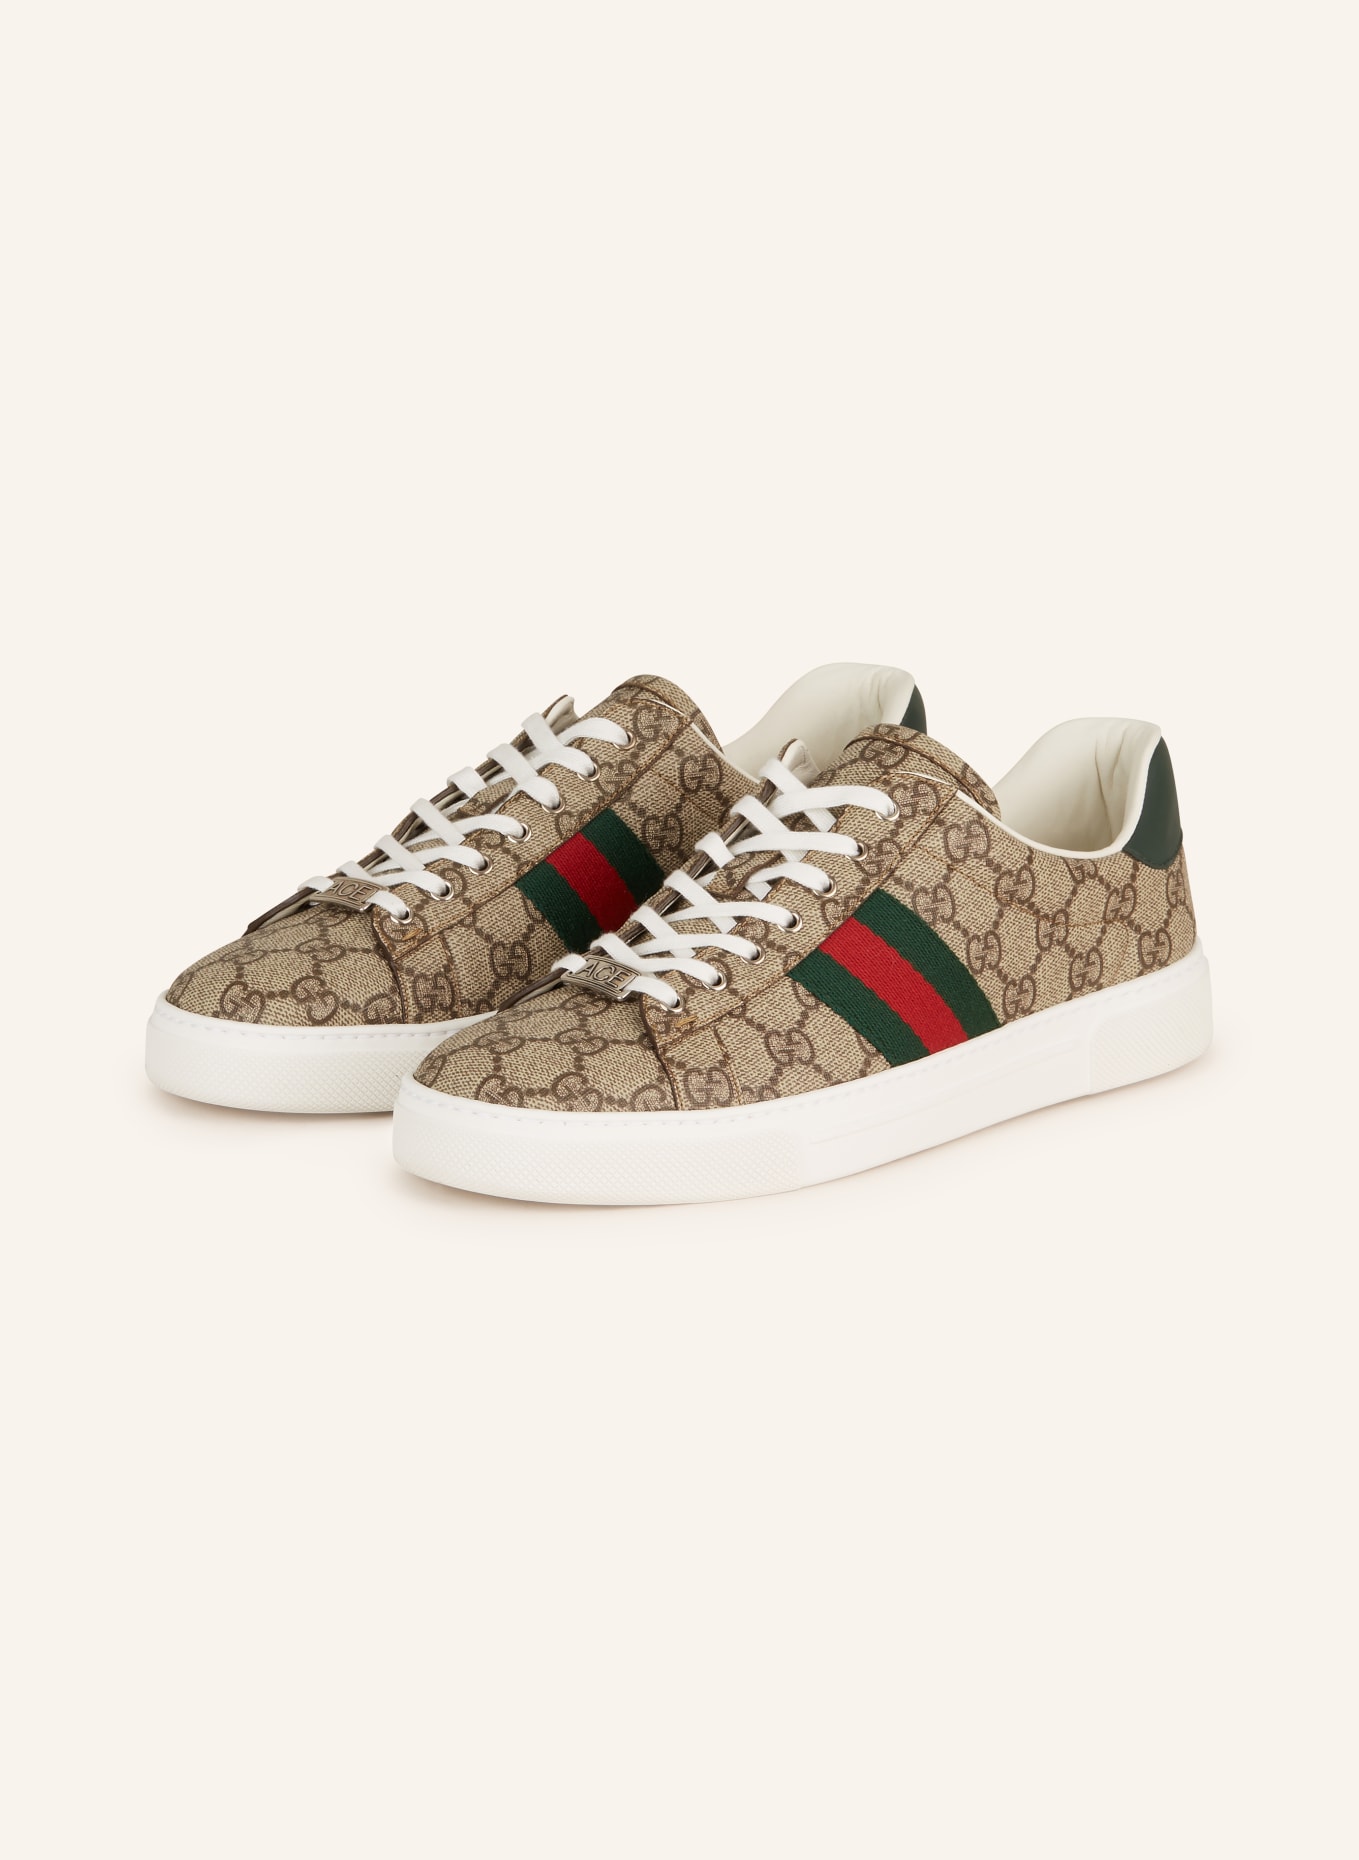 Gucci Ace Gg Embellished Sneakers | italist